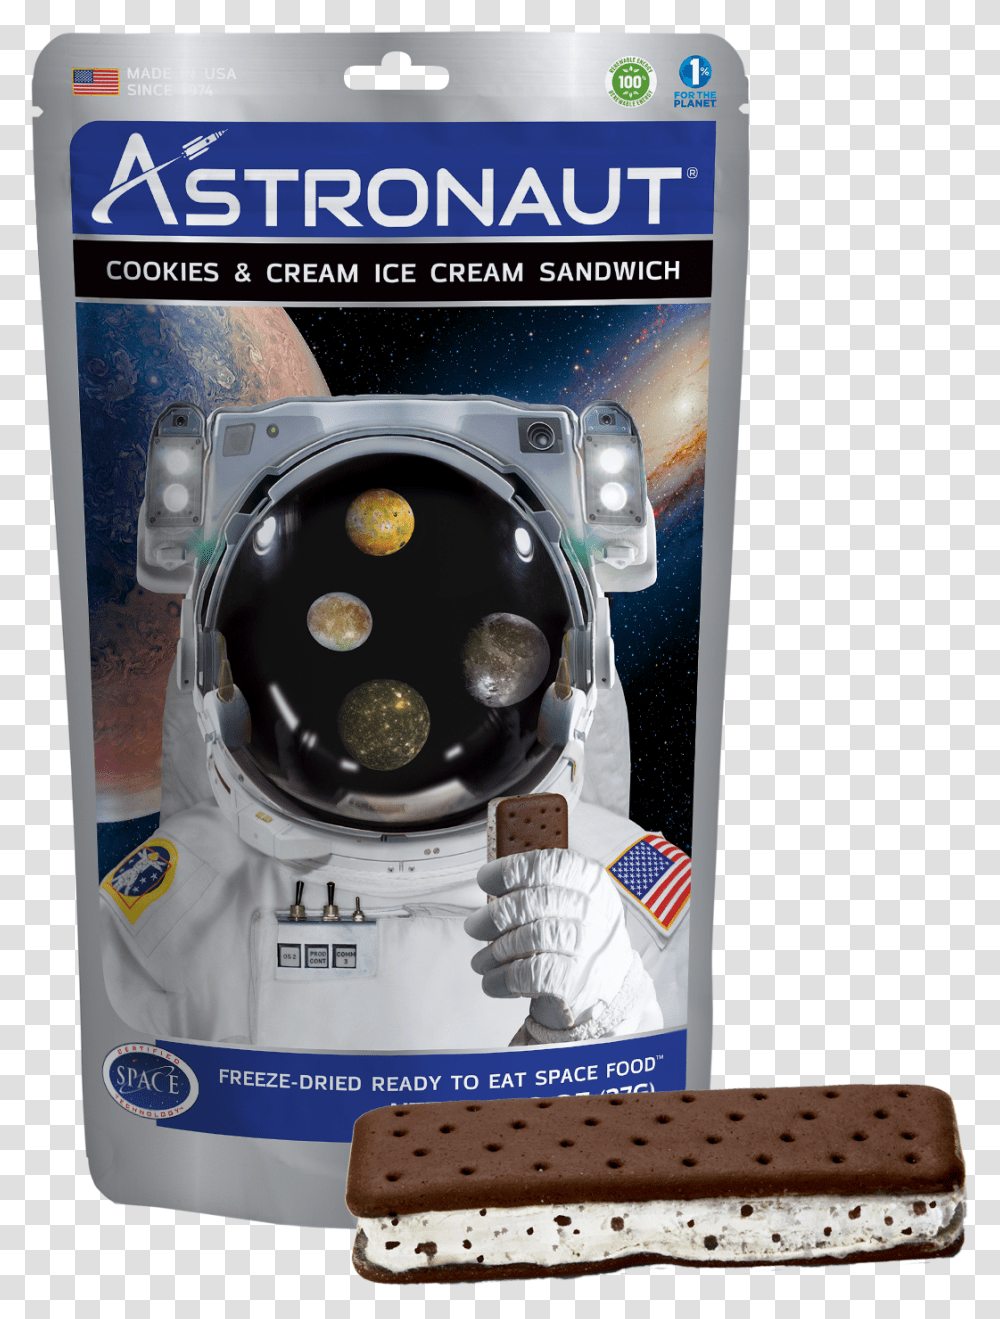 Astronaut Cookies And Cream Ice Cream Sandwich Cookies And Cream Astronaut Ice Cream, Helmet, Apparel, Wristwatch Transparent Png